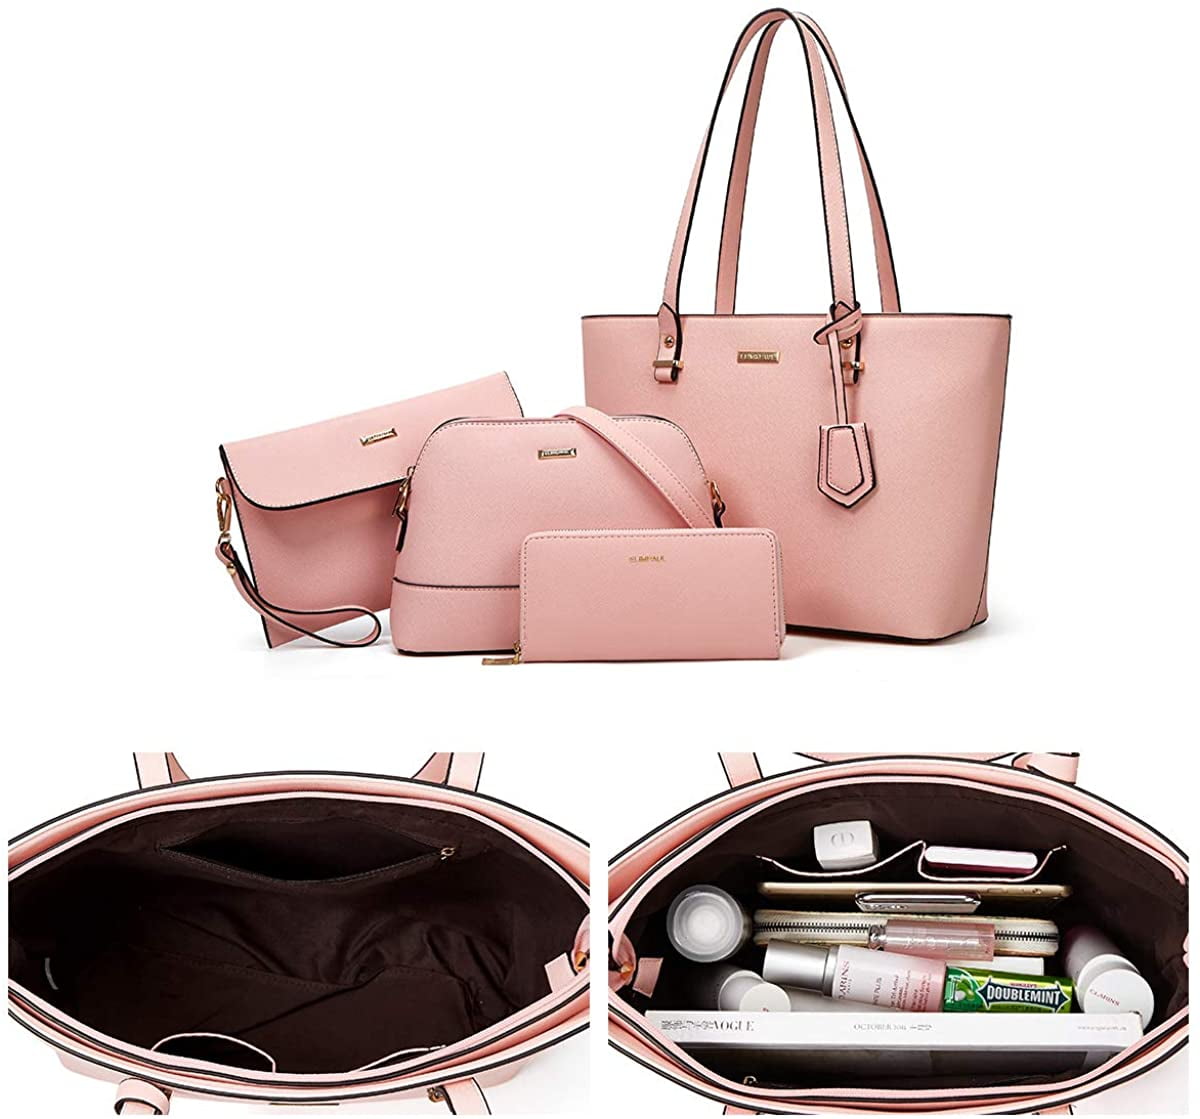 Buy LaFille Handbag For Women & Girls | Set of 5 Combo | Ladies Purse &  Handbags for Office & College (Beige,Pink) at Amazon.in